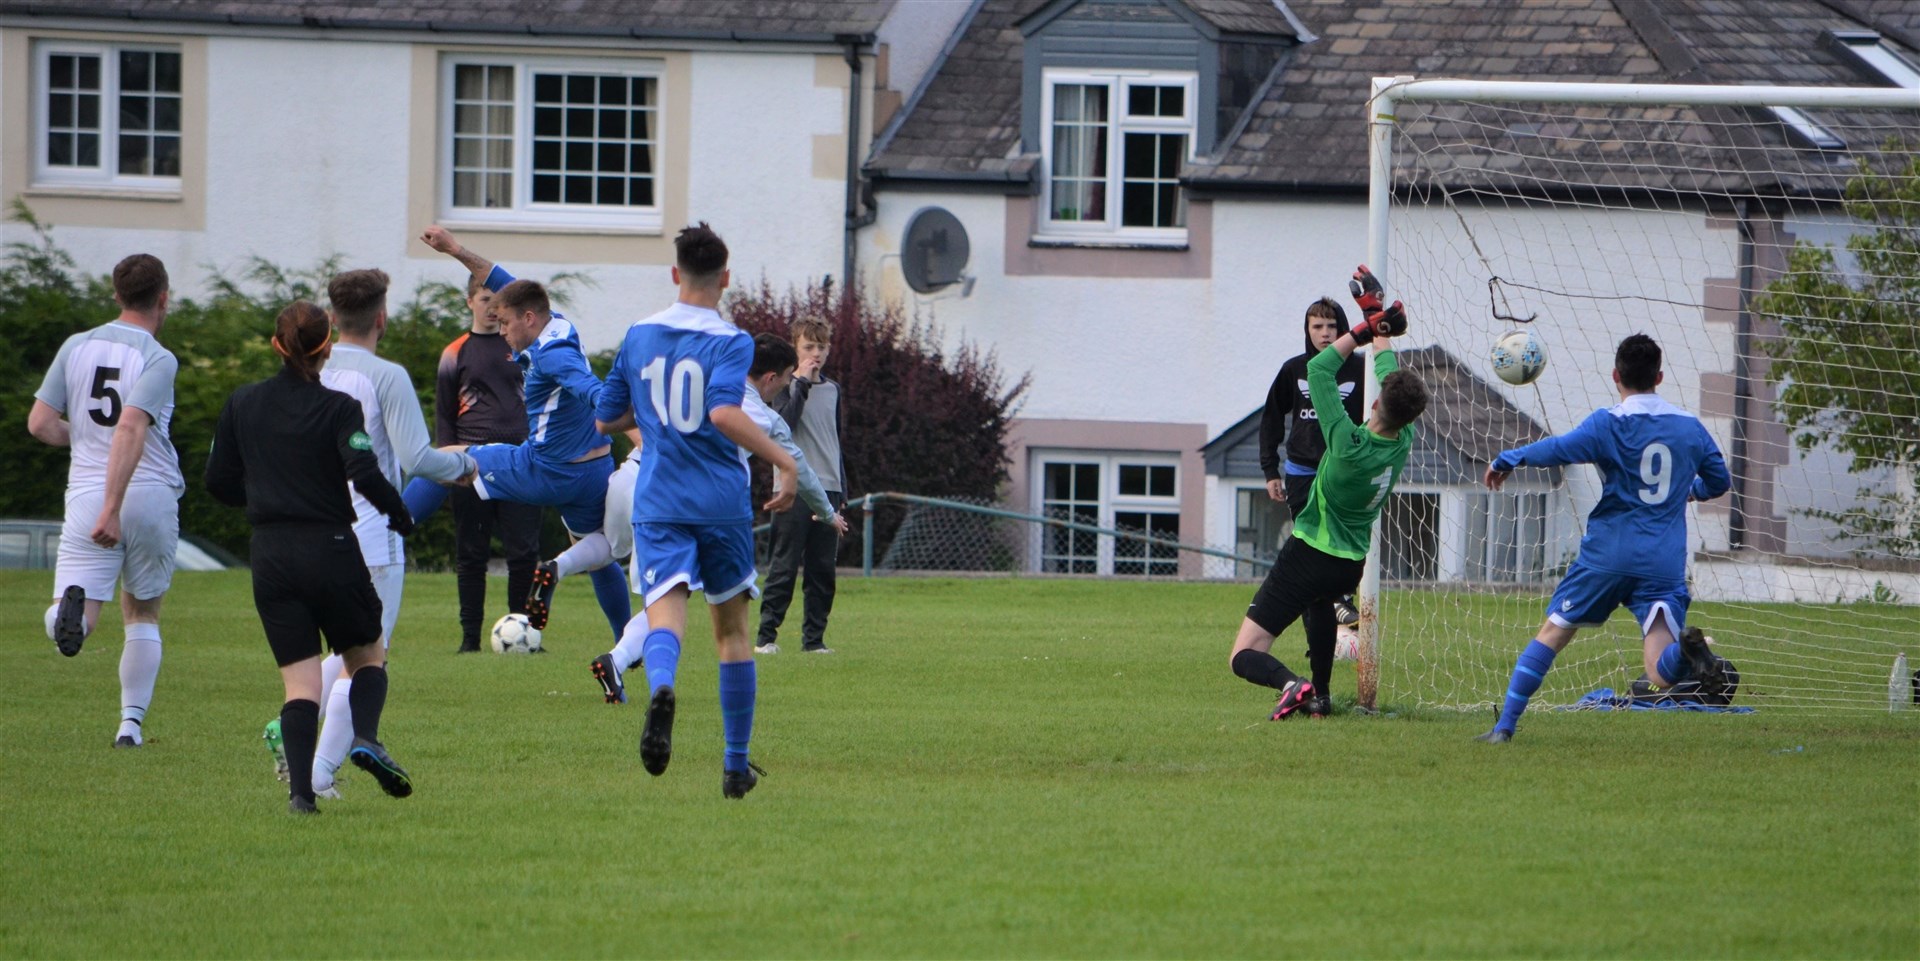 Craig Ross scores his first goal in a hat trick for Maryburgh against Bellmac. Picture: George Mackenzie